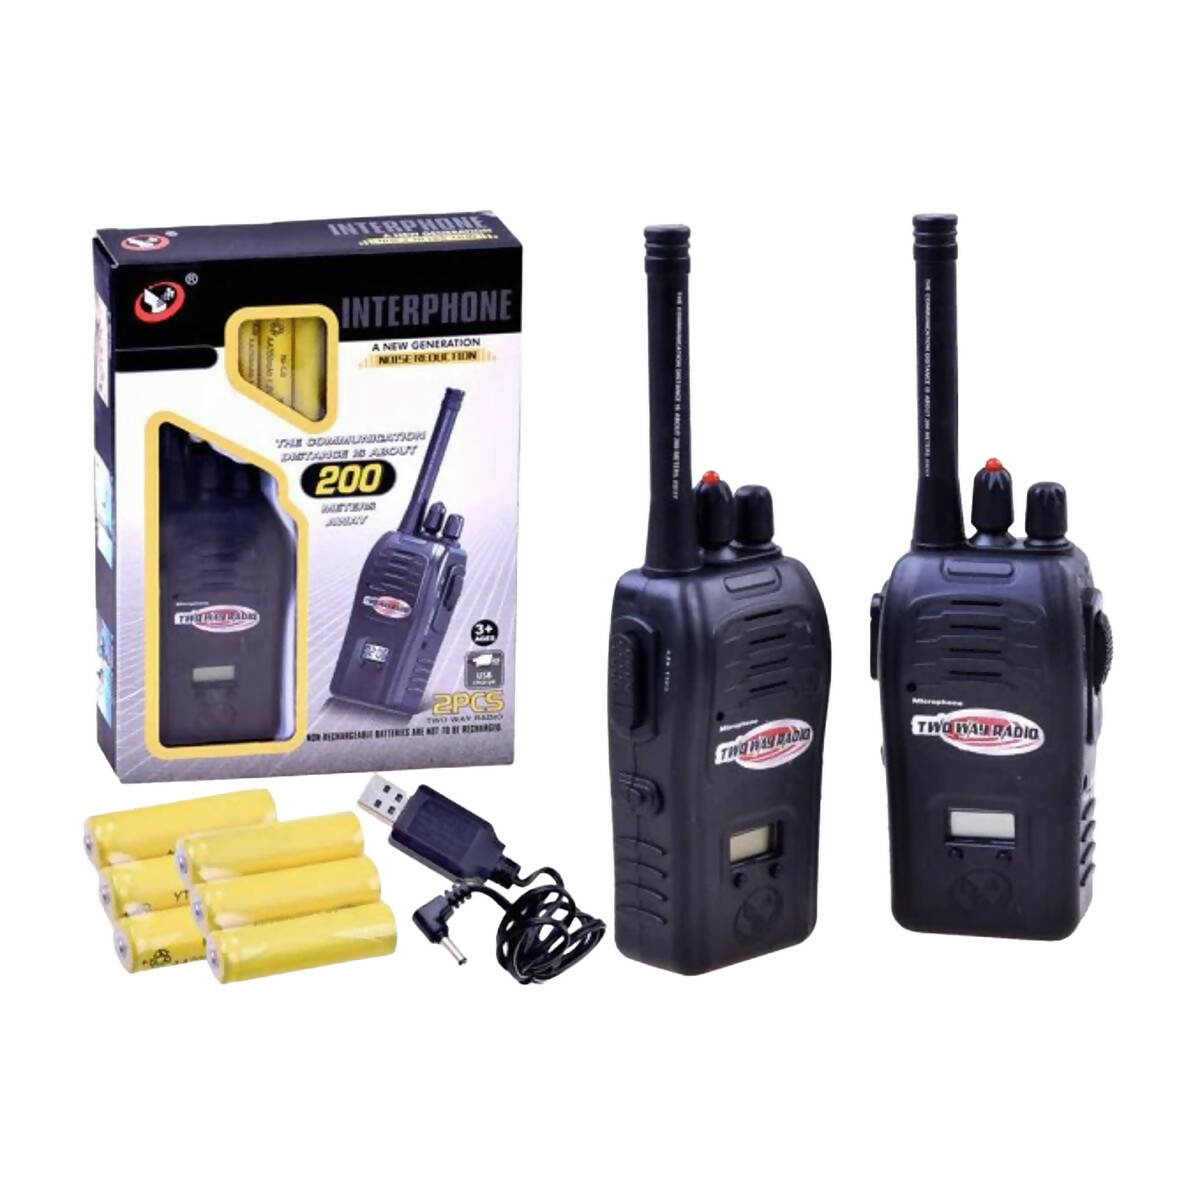 New Generation Noise Reduction Walkie-Talky 200 Meter away For kids - Re-charebale